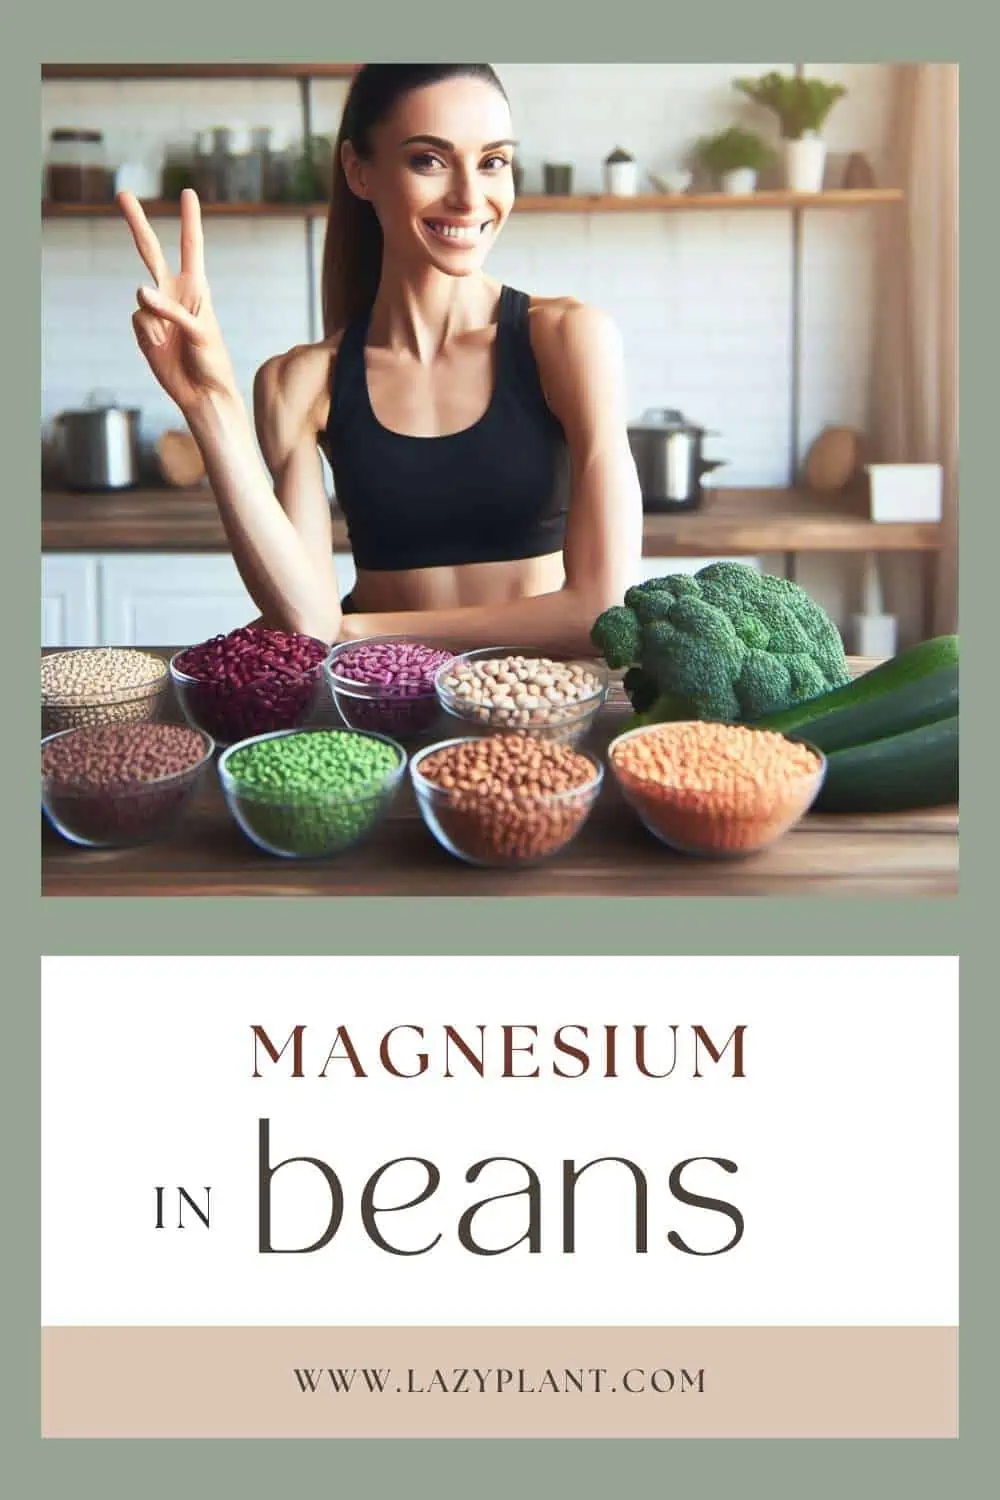 Beans are excellent natural sources of magnesium.